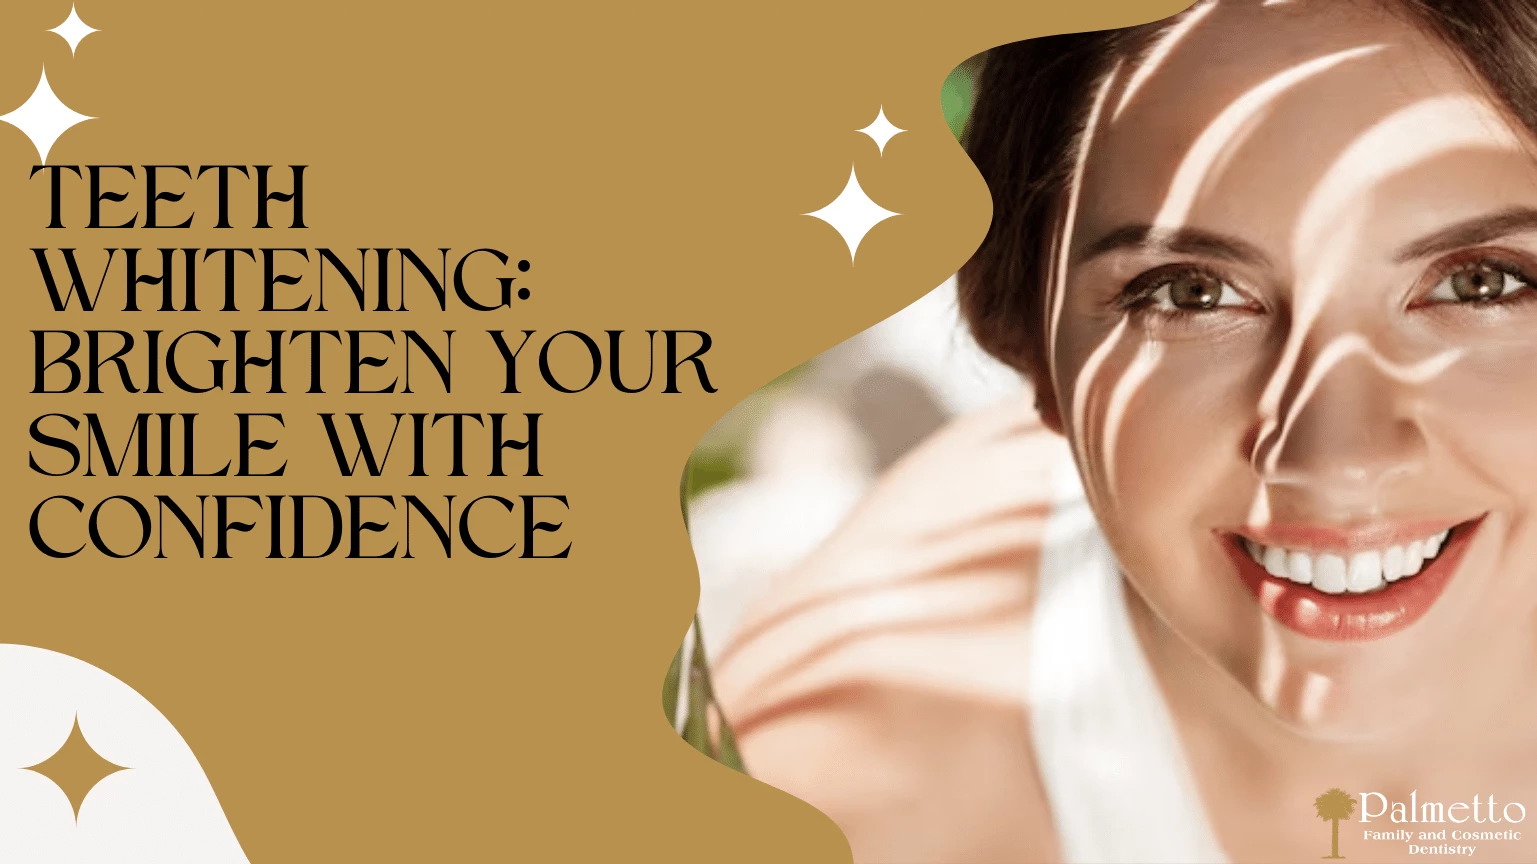 Teeth Whitening: Brighten Your Smile with Confidence